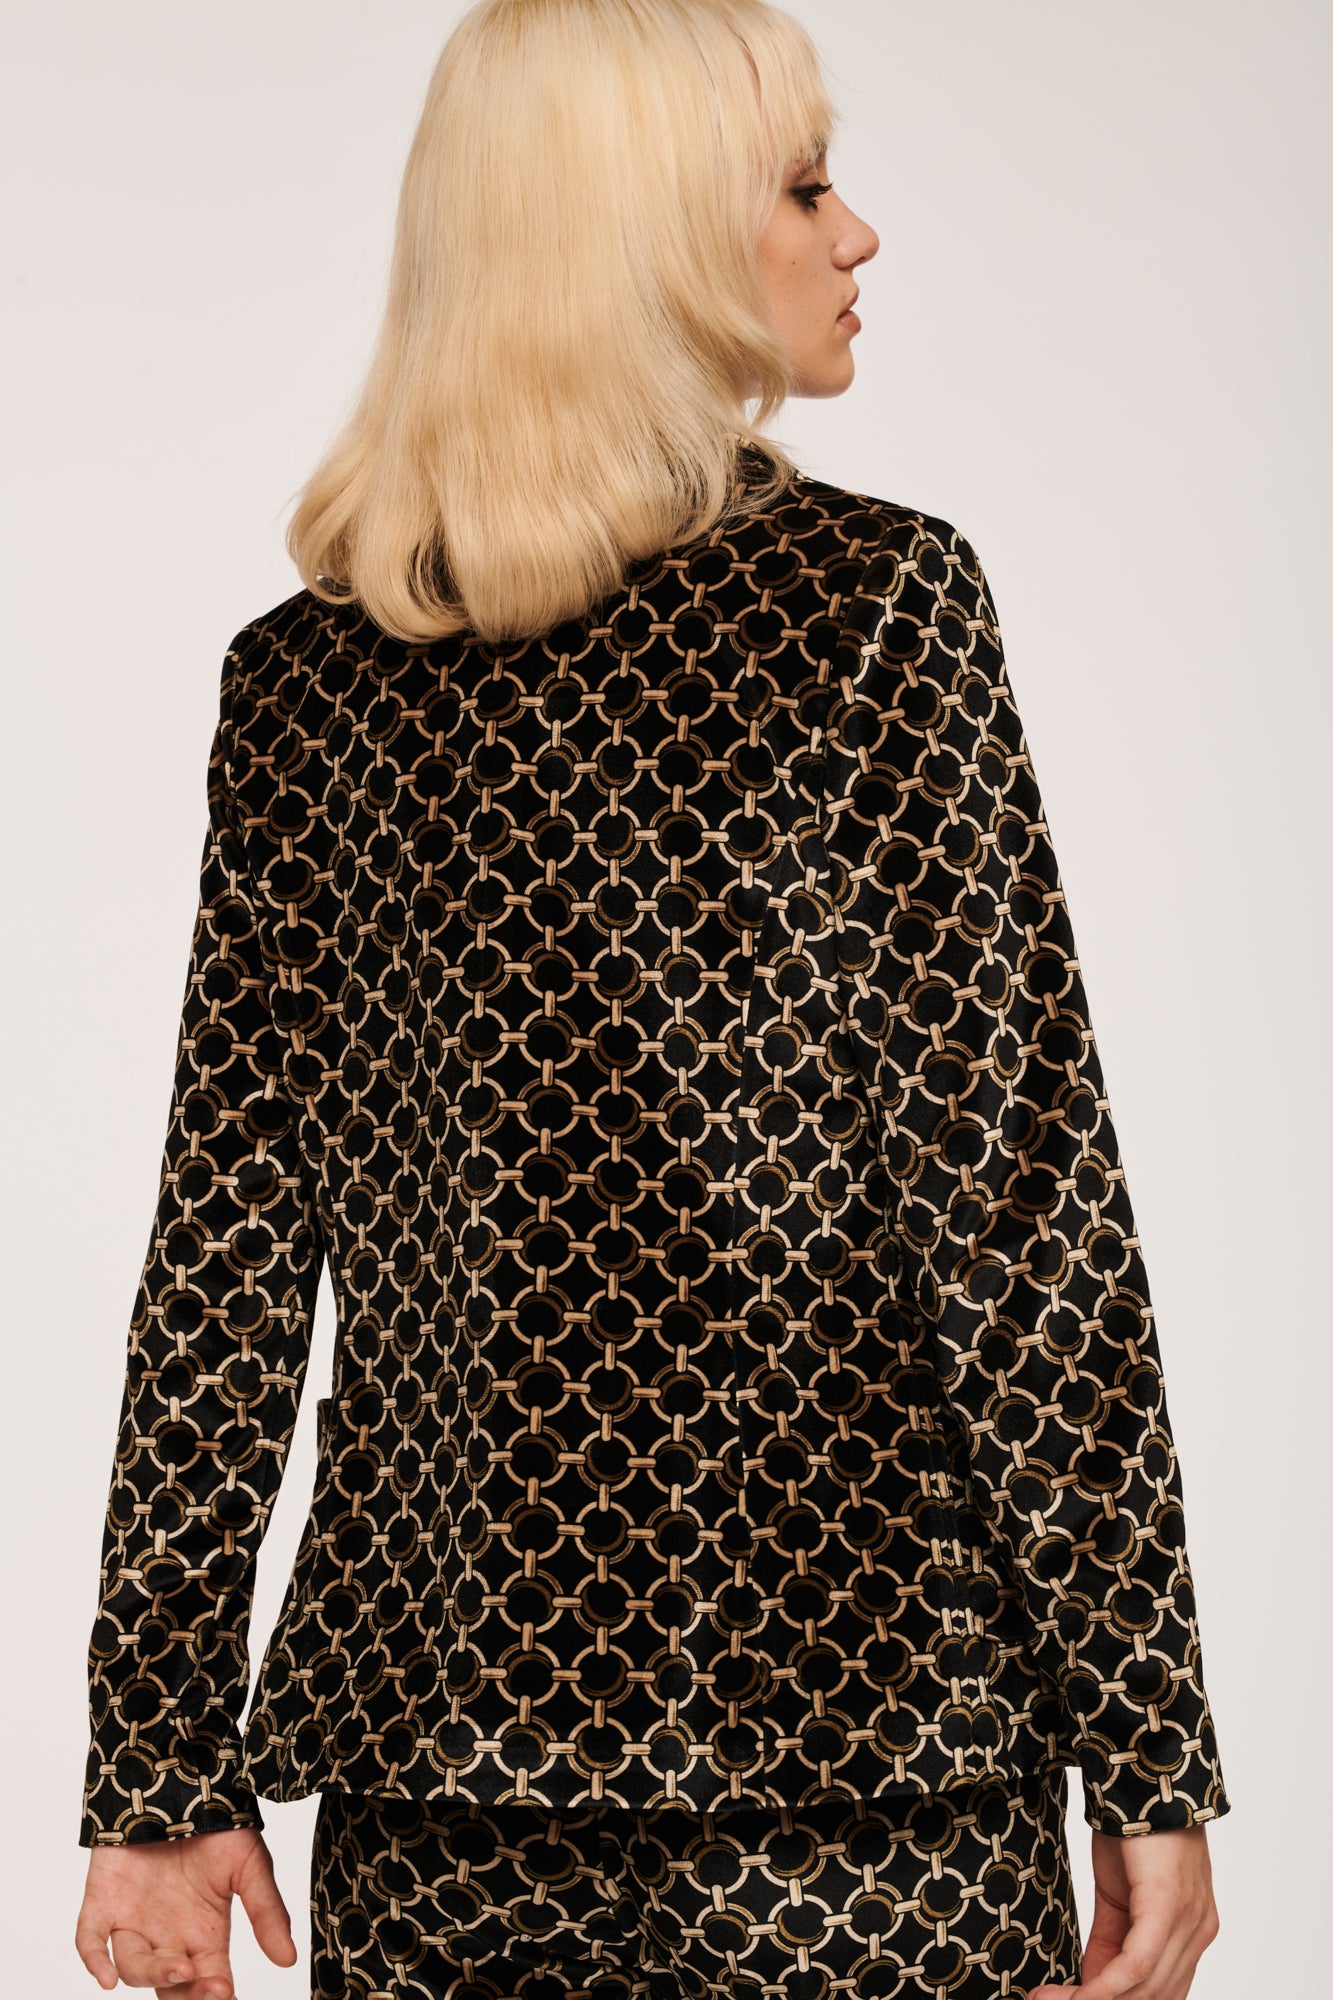 The Chain Printed Velvet Suit Jacket